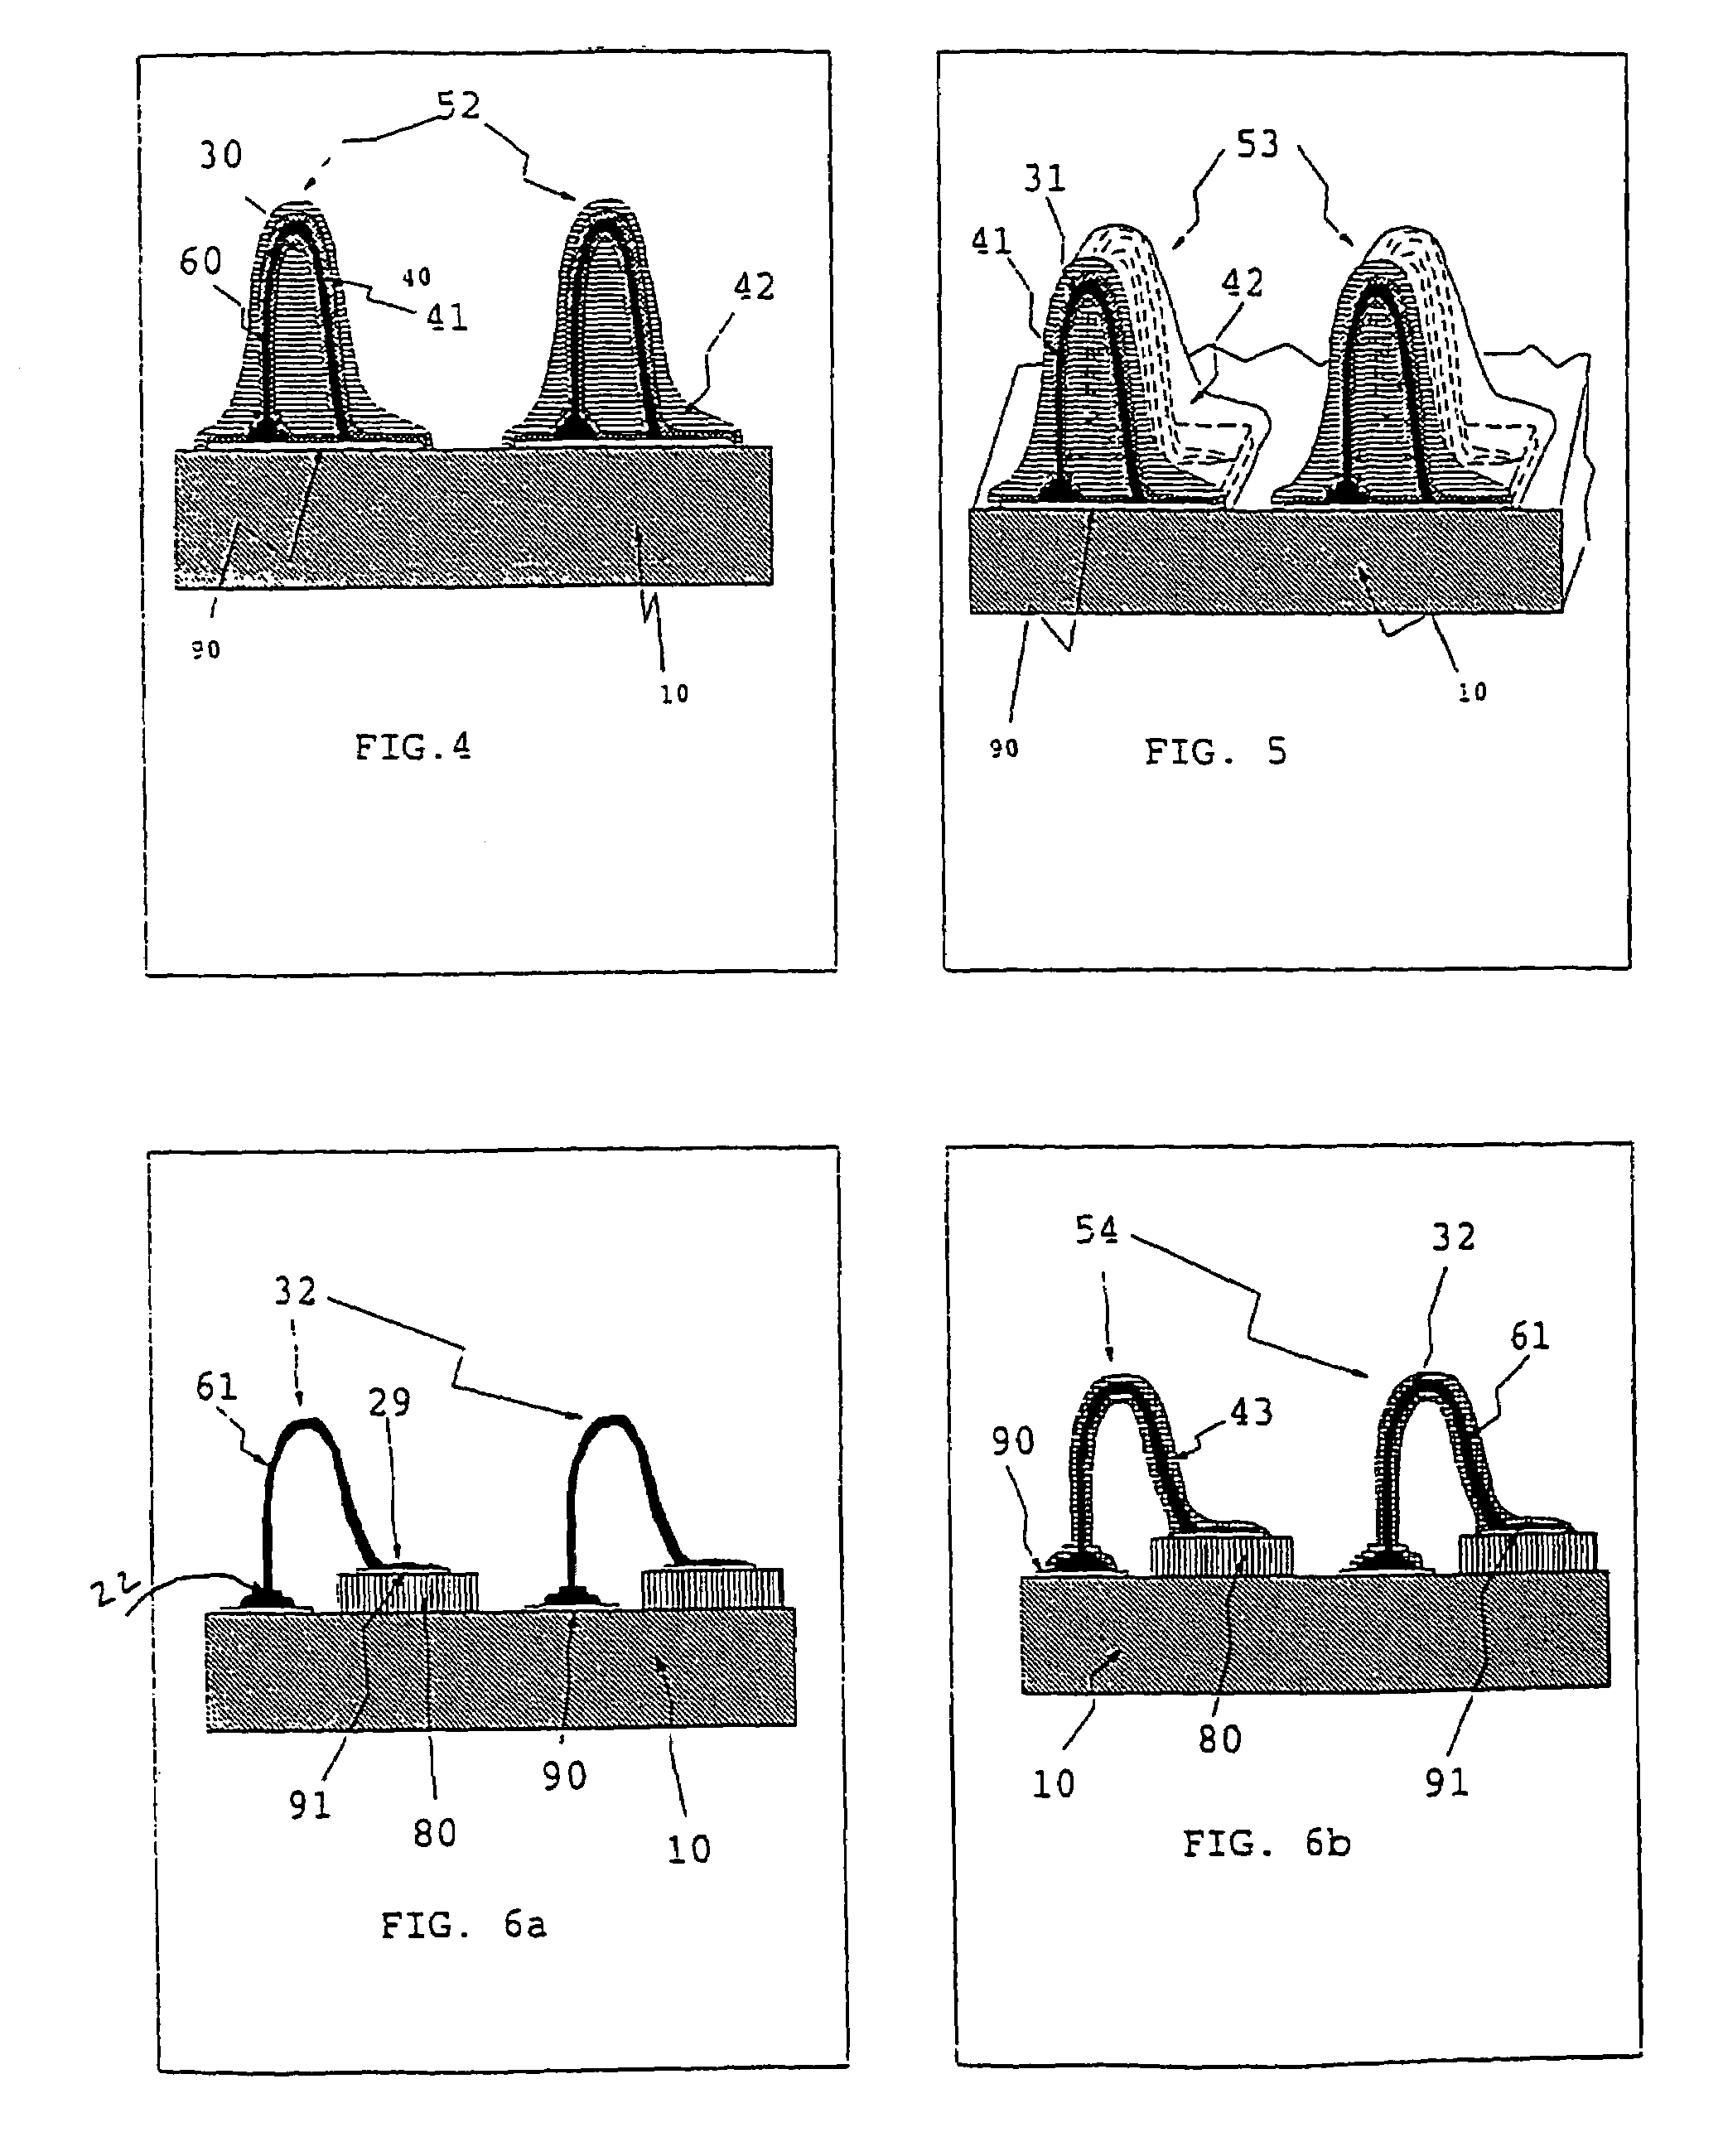 Contact structures and methods for making same